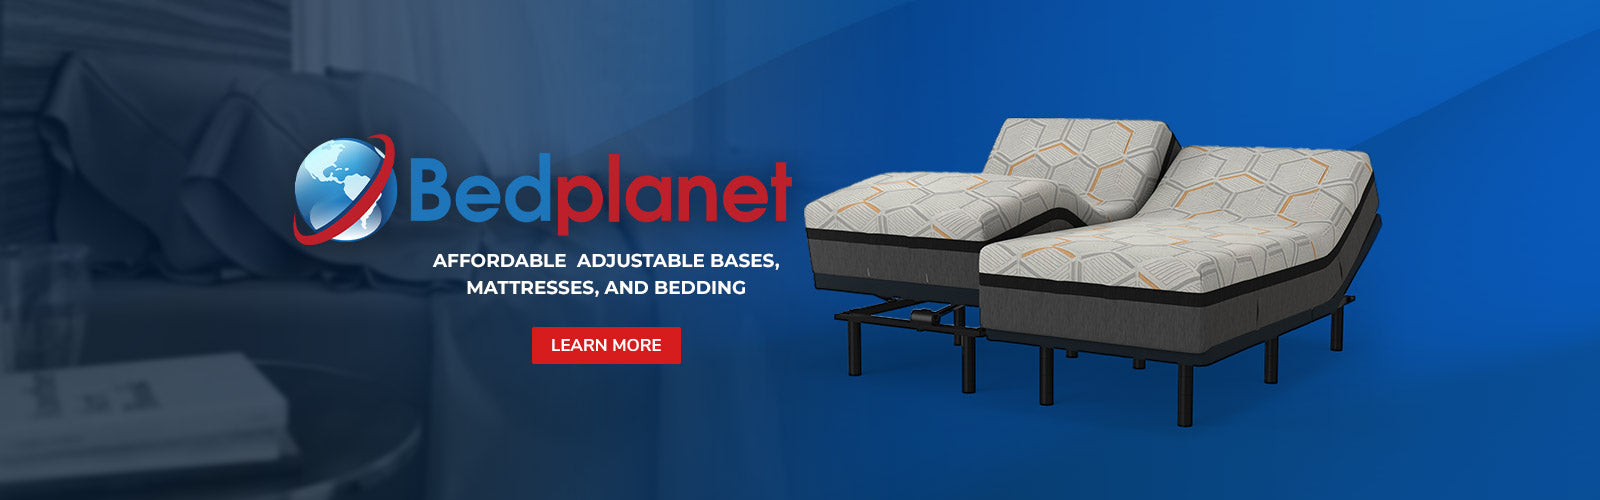 Bedplanet Sleep Products- Affordable Adjustable Beds, Mattresses and Bedding